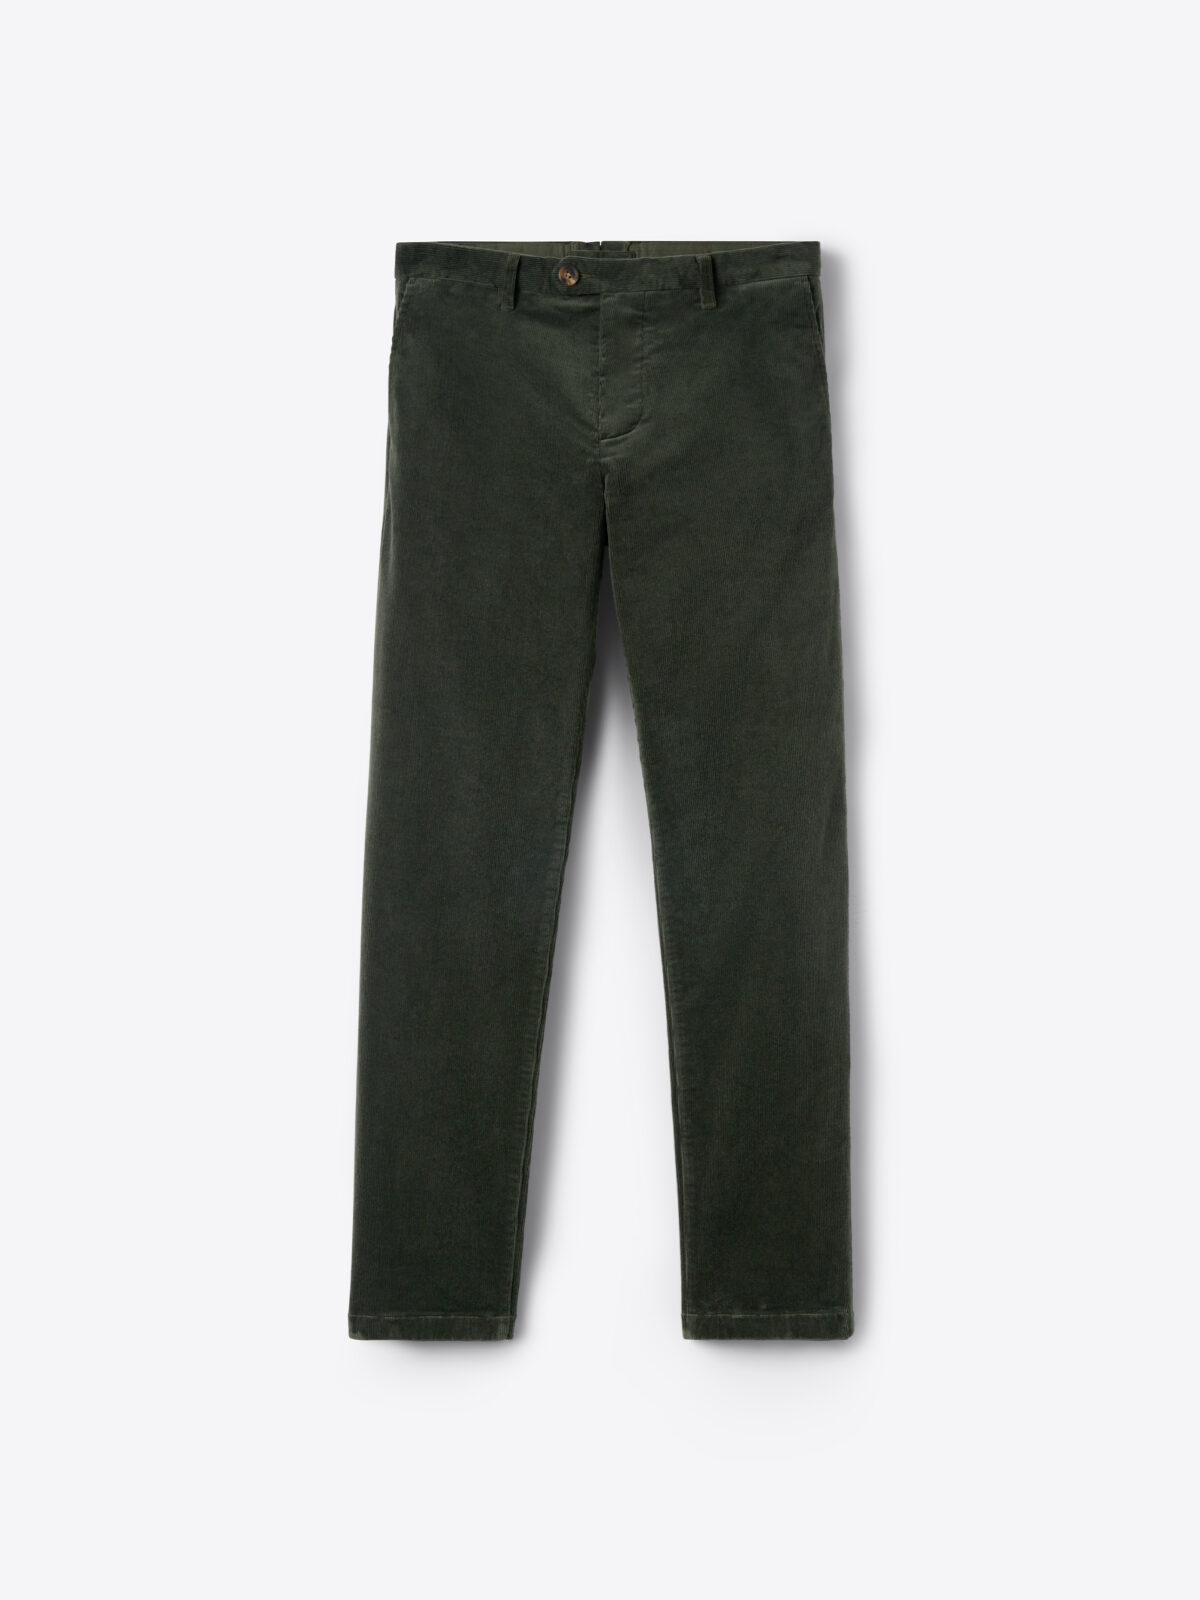 Green Corduroy Pants for Men - Green Tapered Pants